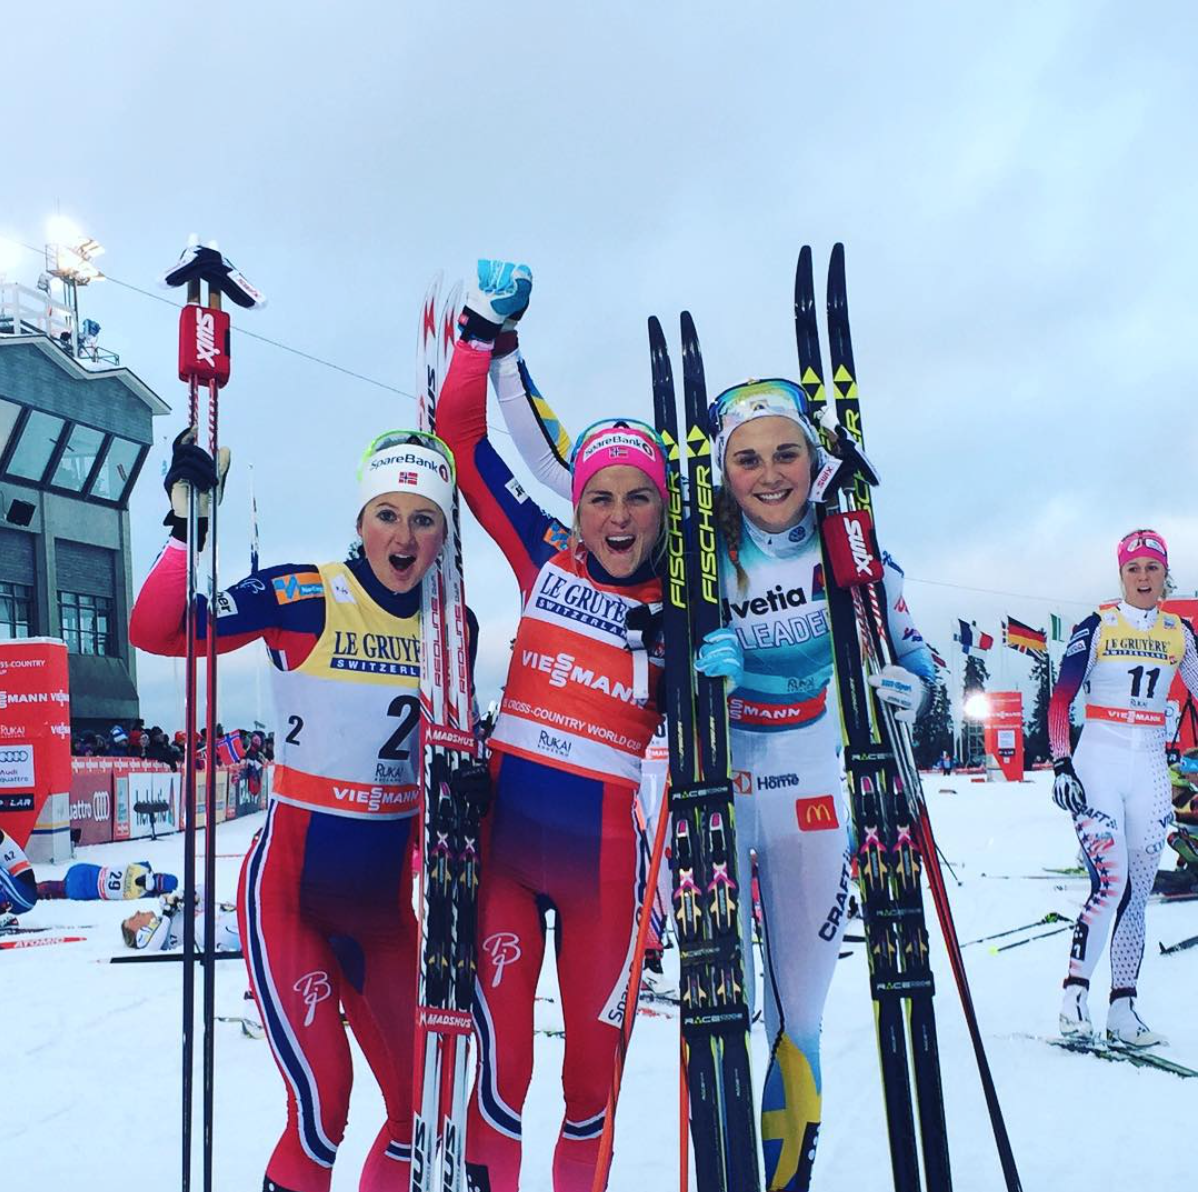 Therese Johaug of Norway (center) celebrates the overall mini-tour win in Kuusamo, Finland, while Stina Nilsson (Sweden, right) and Ingvild Flugstad Ørtberg (Norway, left) take second and third and prove their distance-skiing chops. (Photo: FIS Cross Country / Instagram)